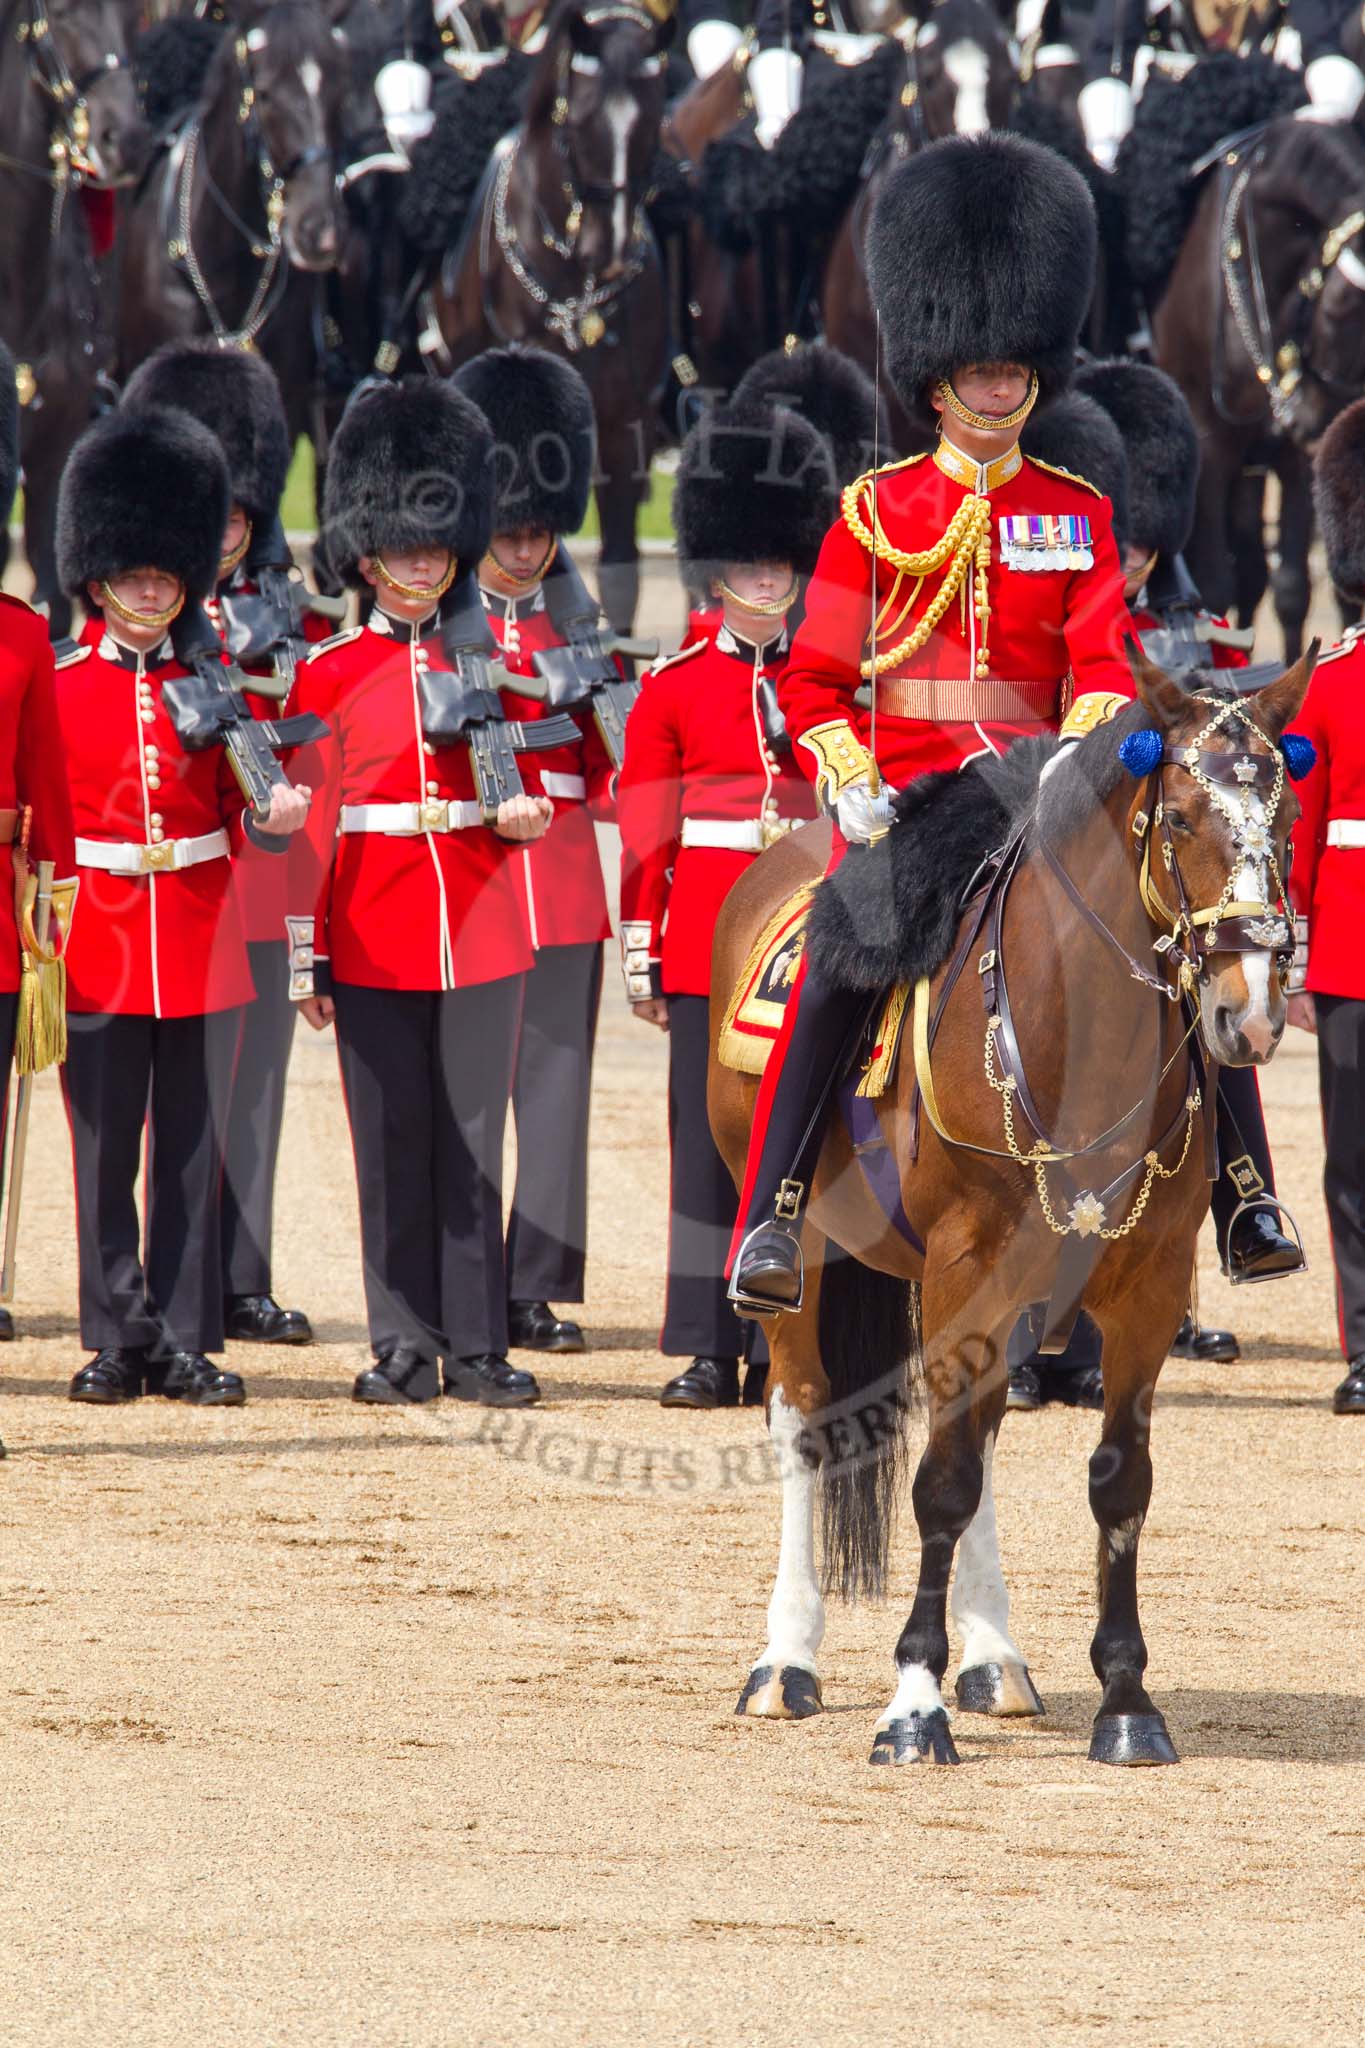 Trooping the Colour 2011: The Field Officer, Lieutenant Colonel Lincoln P M Jopp, observing the Trooping of the Colour..
Horse Guards Parade, Westminster,
London SW1,
Greater London,
United Kingdom,
on 11 June 2011 at 11:29, image #219